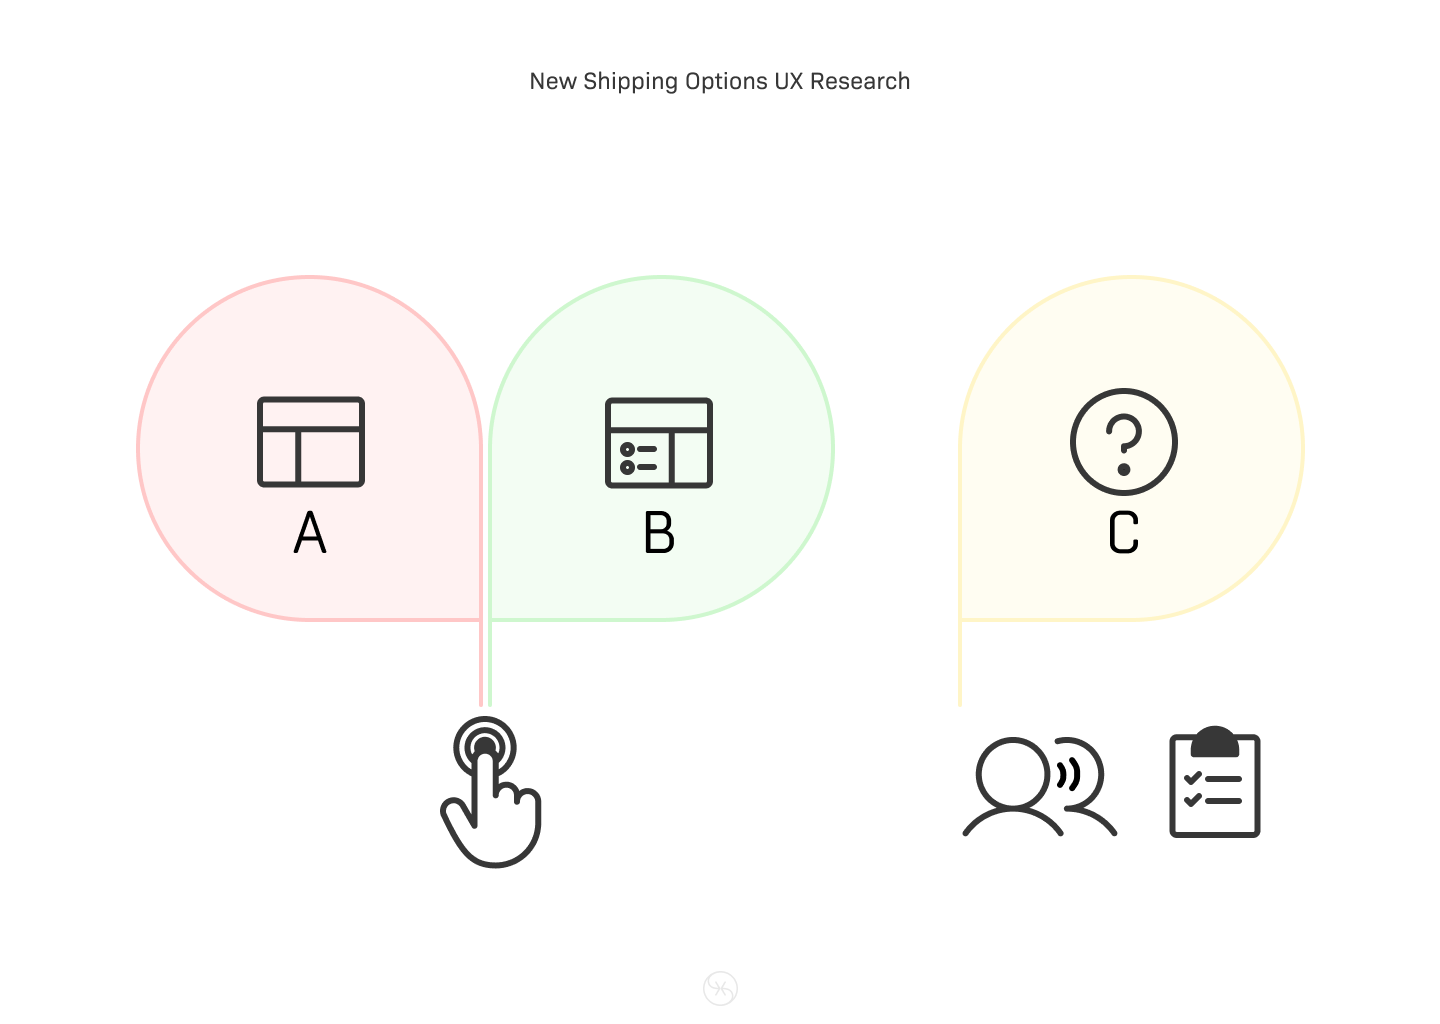 Illustration of UX research methods in a shipping options use case. 